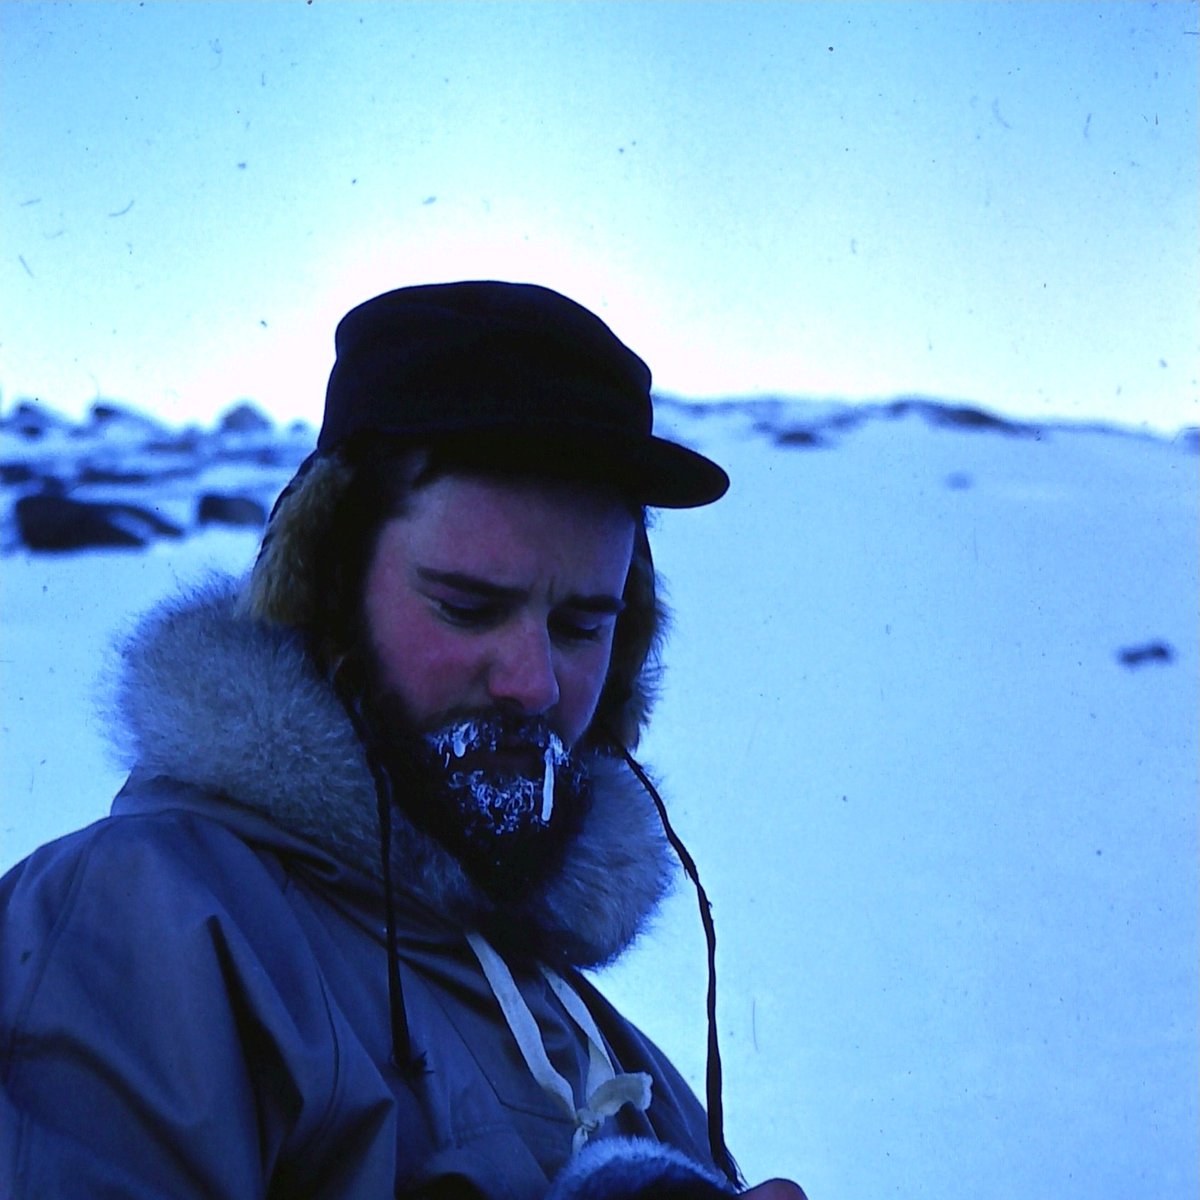 PS. George also was dropped by his then-fiance live on Radio Australia's weekly 'Calling Antarctica' program in 1960. What a year. Go and listen to his stories.